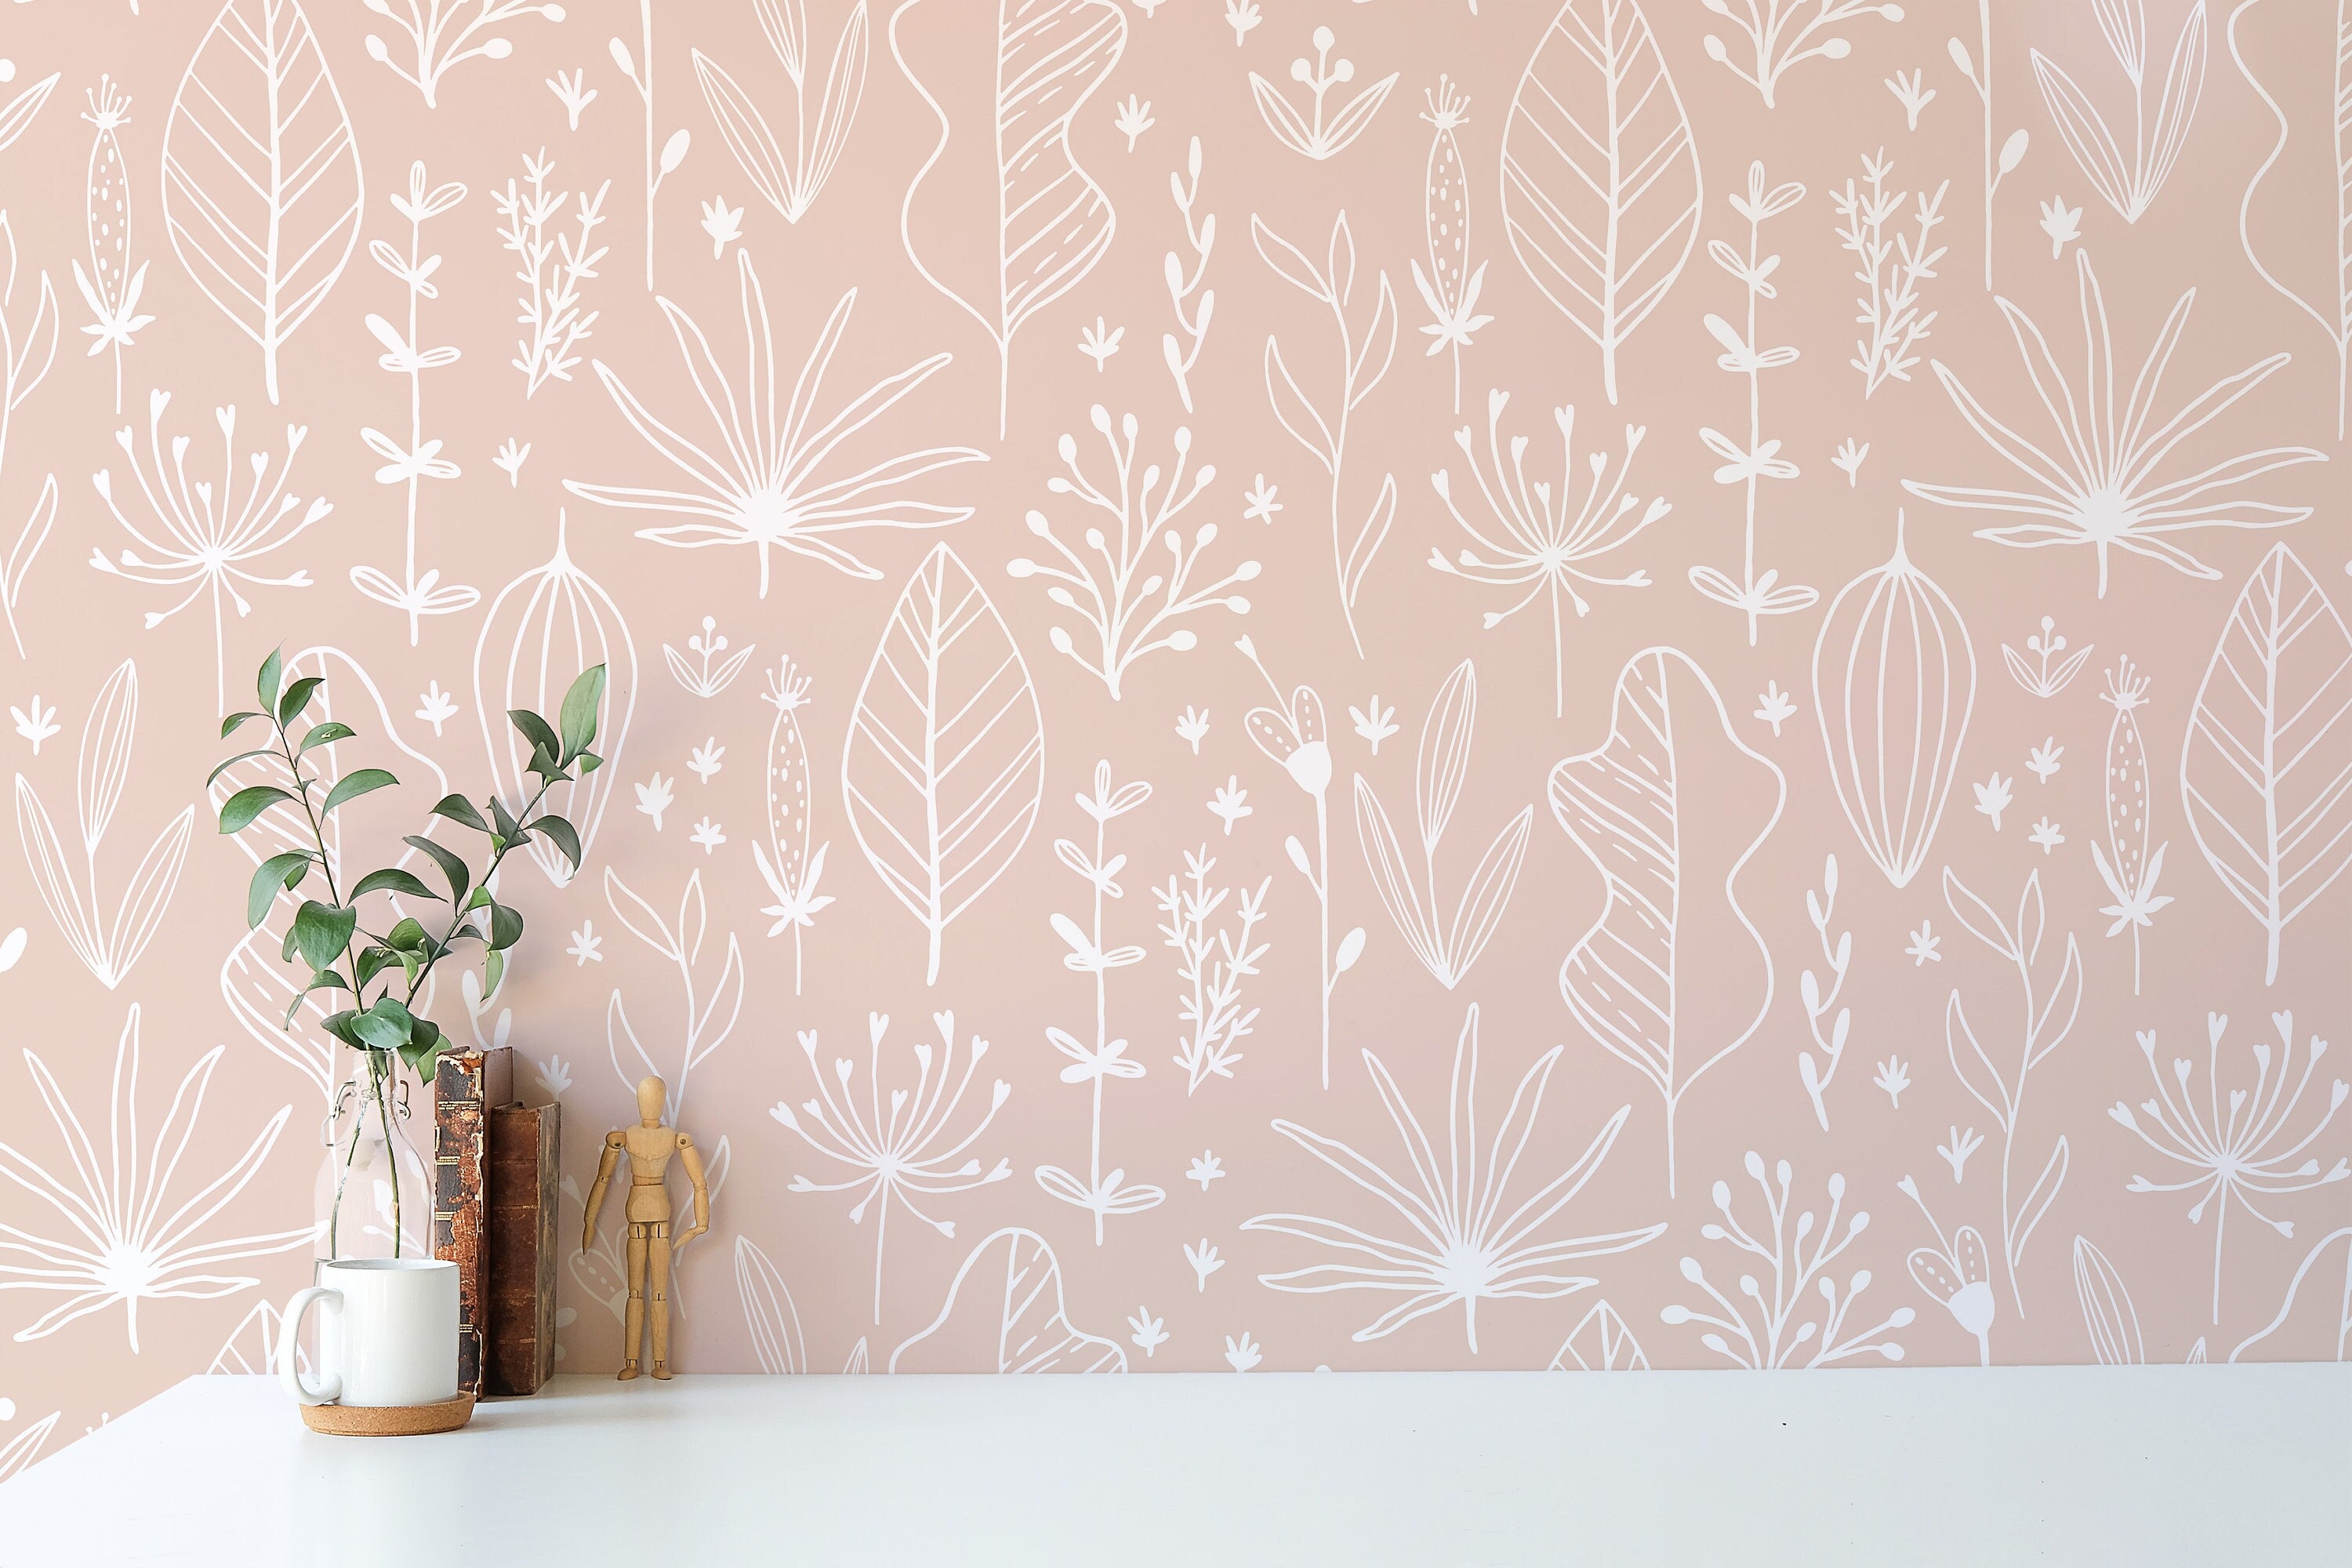 Boho Wallpaper Leaf Decorative Adhesive Contact Paper for Nursery